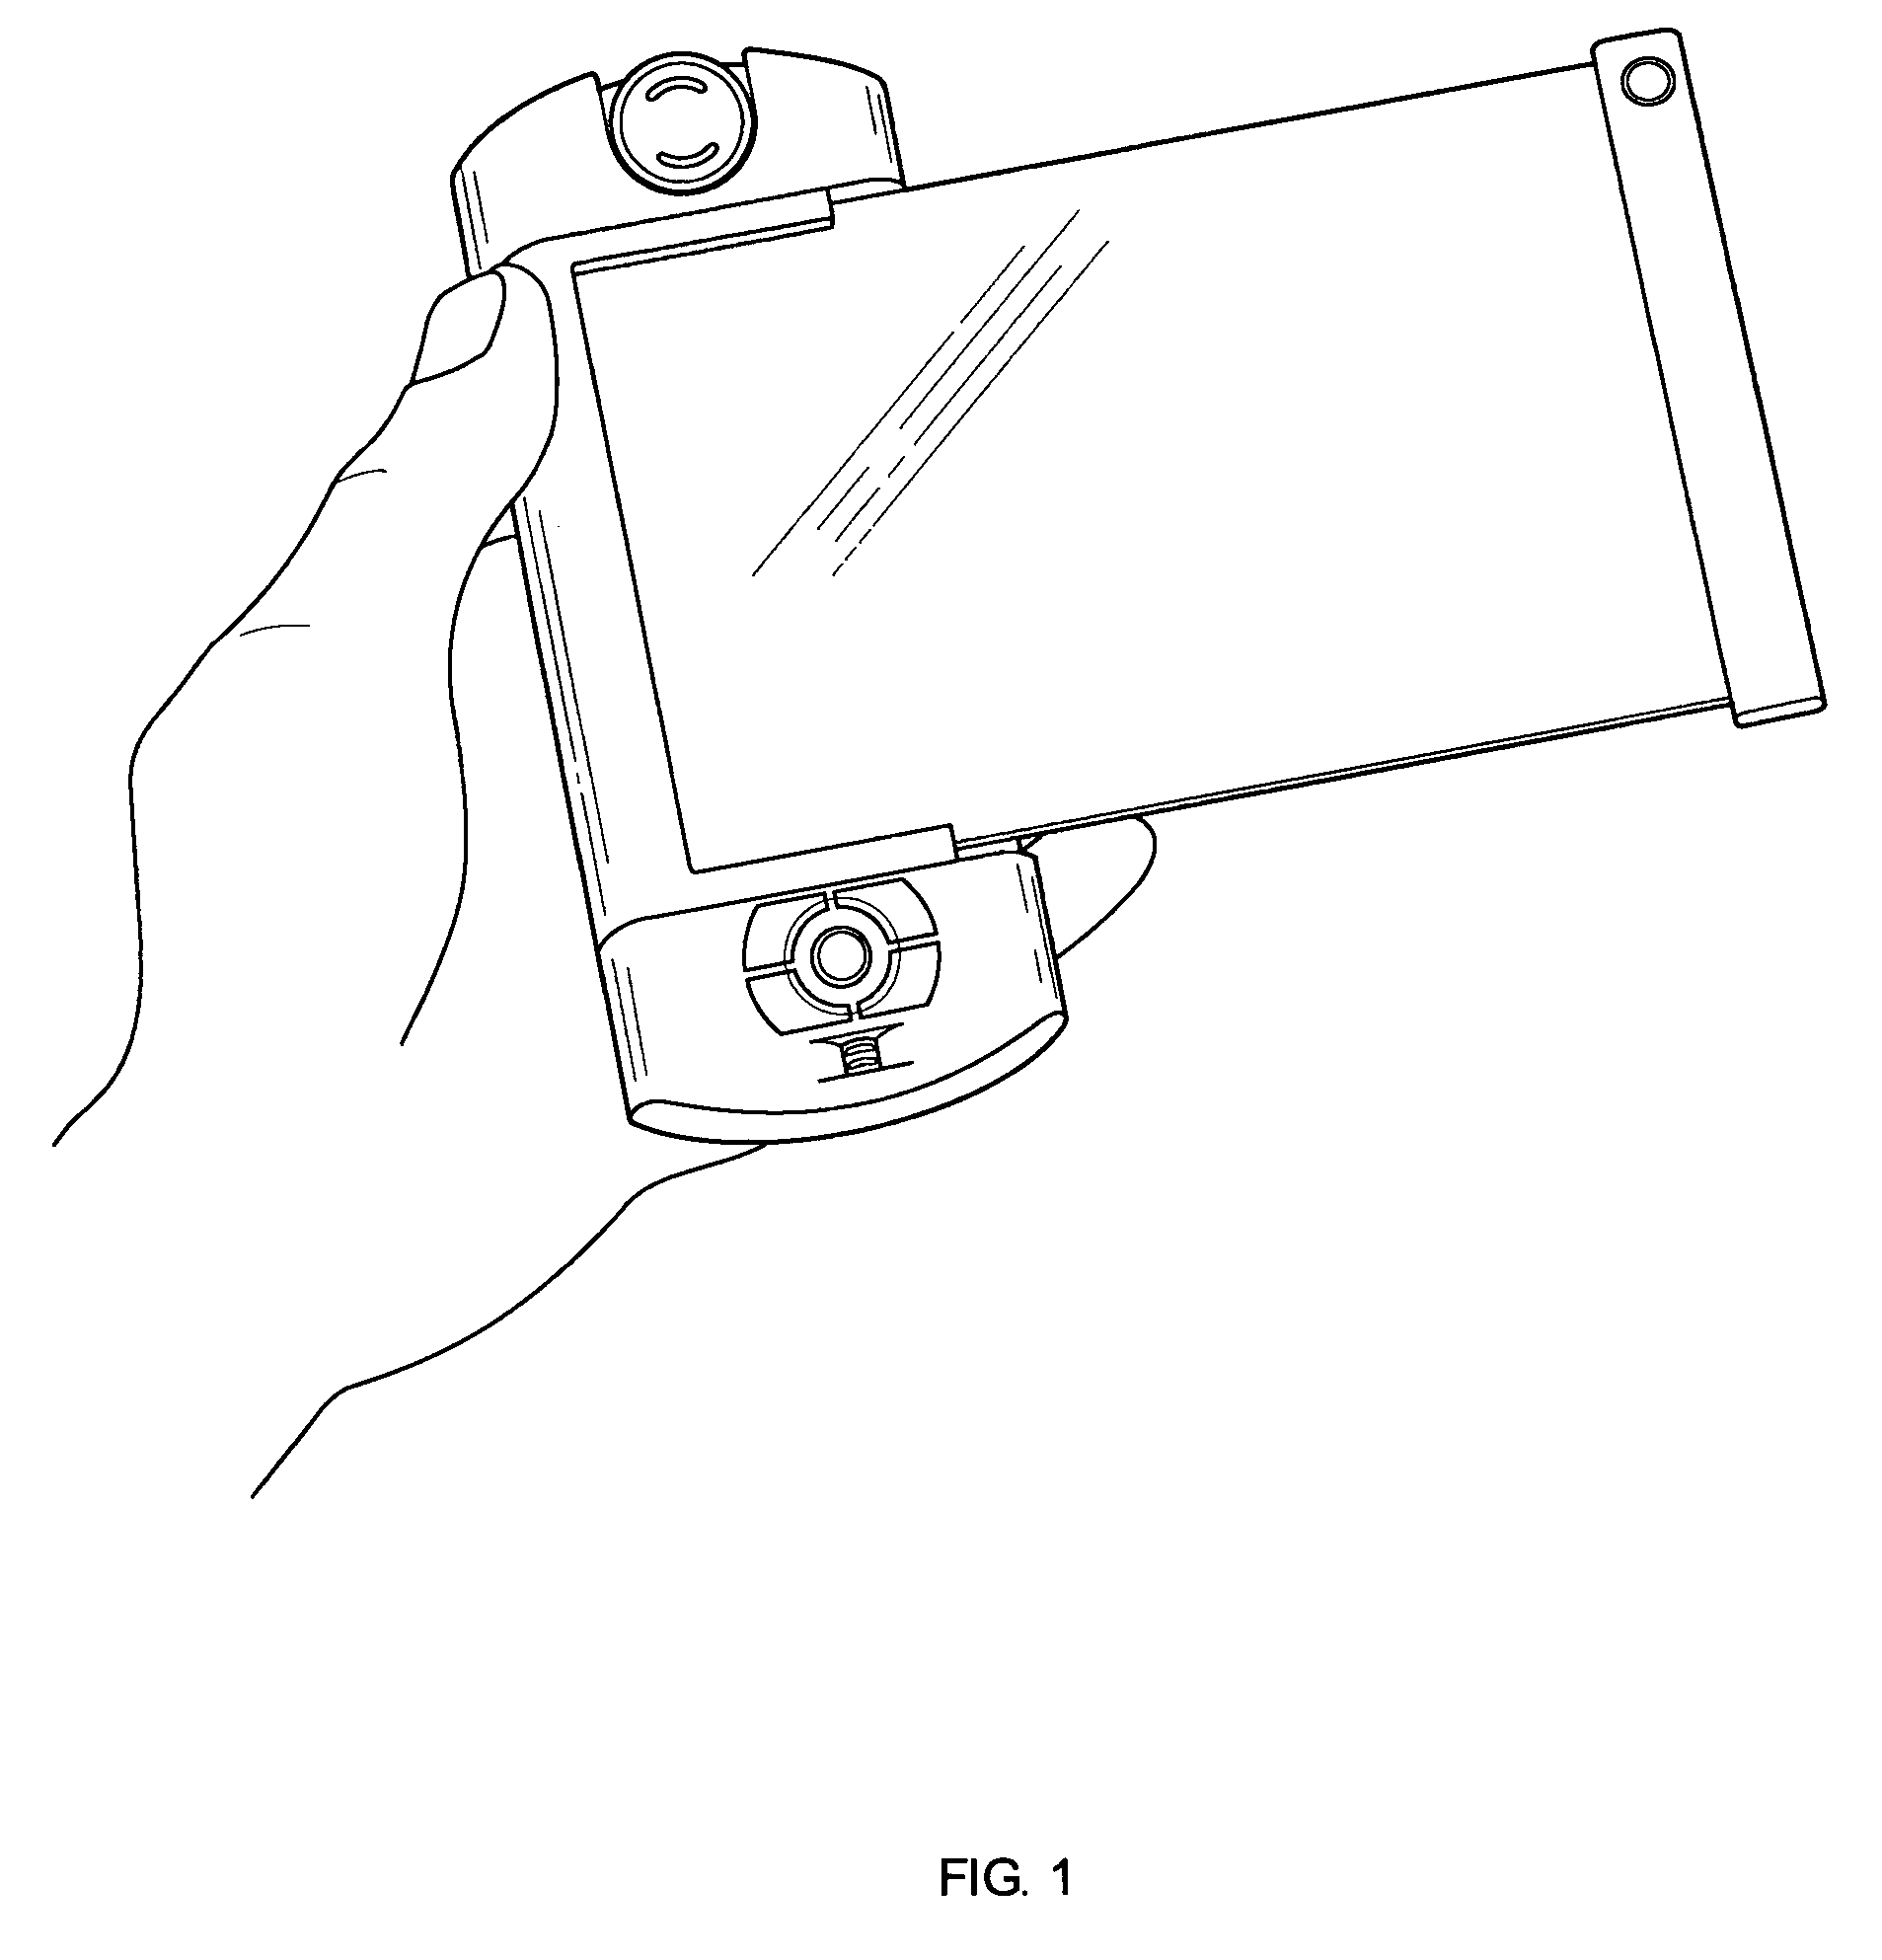 Personal digital device with adjustable interface